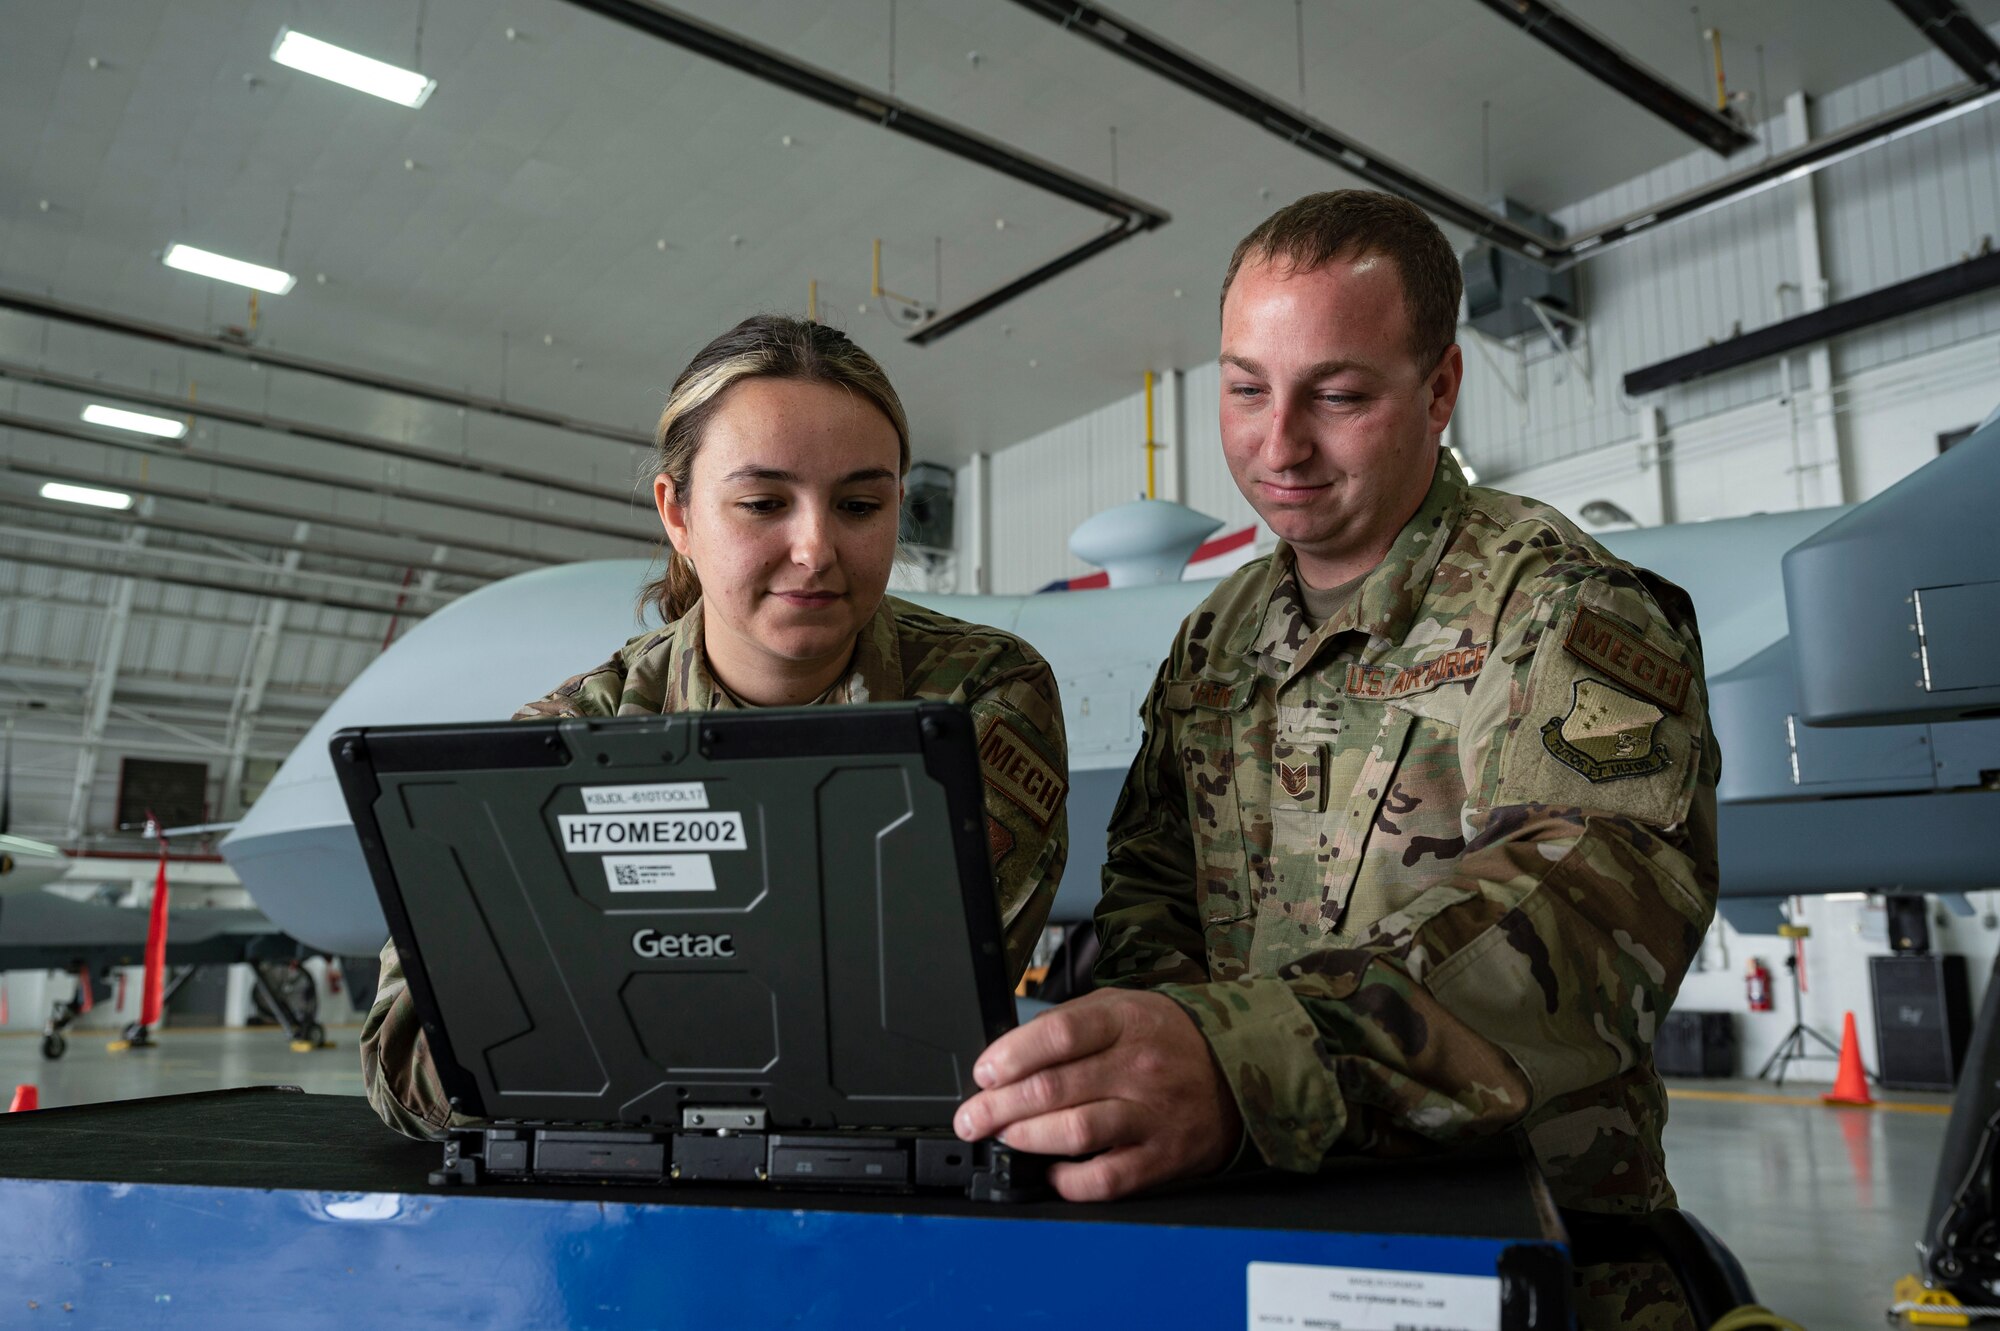 U.S. Air Force Senior Airman Morgan Wilson, 174th Attack Wing crew chief, left, and U.S. Air Force Tech. Sgt. Mathew Main, 491st Attack Squadron crew chief, observe the data from an MQ-9 Reaper at Hancock Field Air National Guard Base, New York, June 29, 2023. The 491st ATKS is composed of both active duty and Air National Guard personnel responsible for training student pilots and sensor operators how to operate an MQ-9 Reaper. (U.S. Air Force photo by Airman 1st Class Isaiah Pedrazzini)